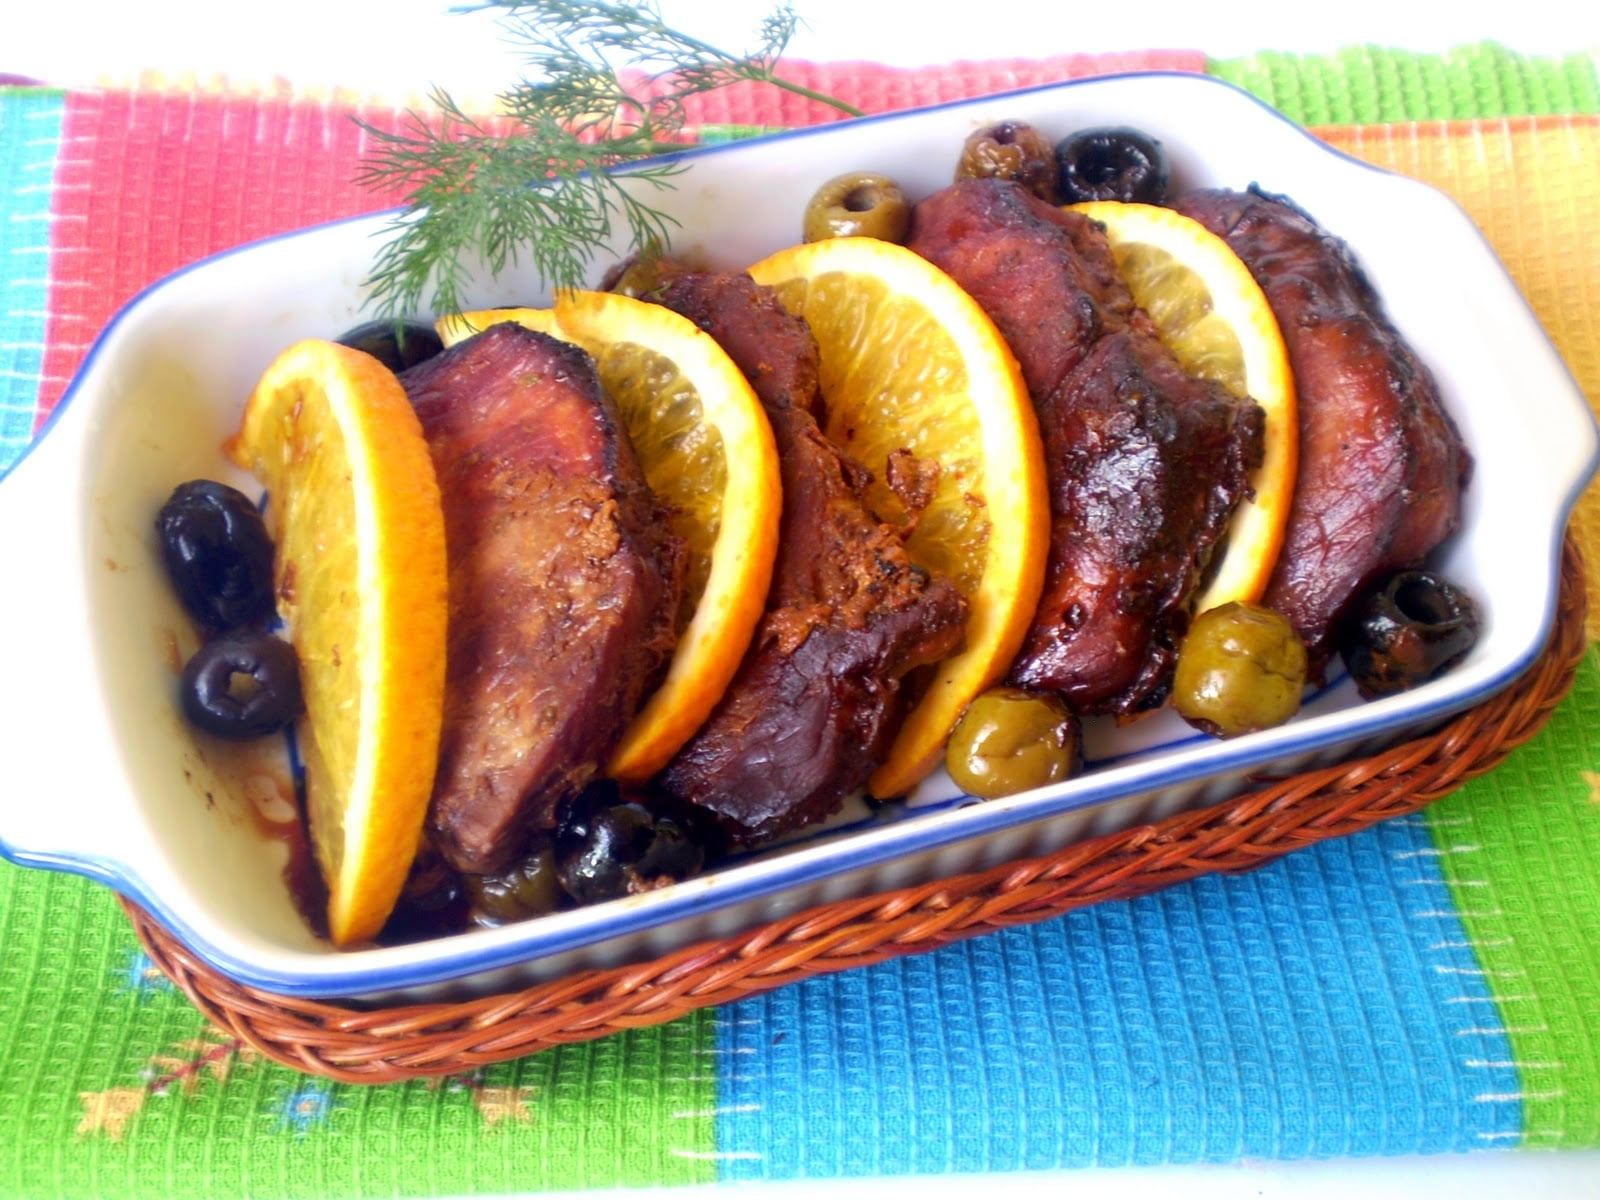 Online crop | food photography of roasted meats with sliced oranges HD